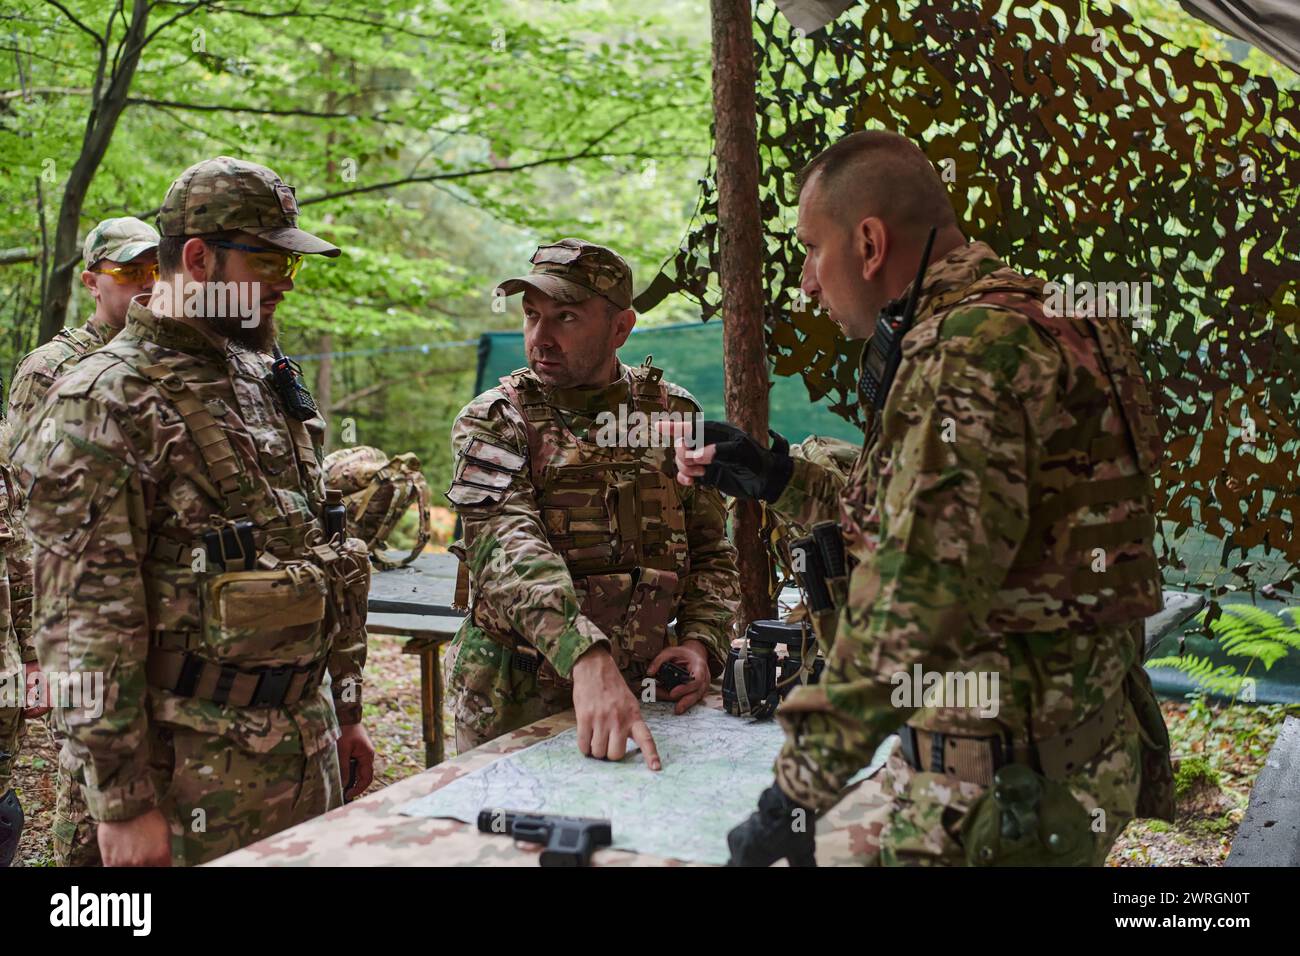 A highly trained military unit strategizes and organizes a tactical mission while studying a military map during a briefing session Stock Photo